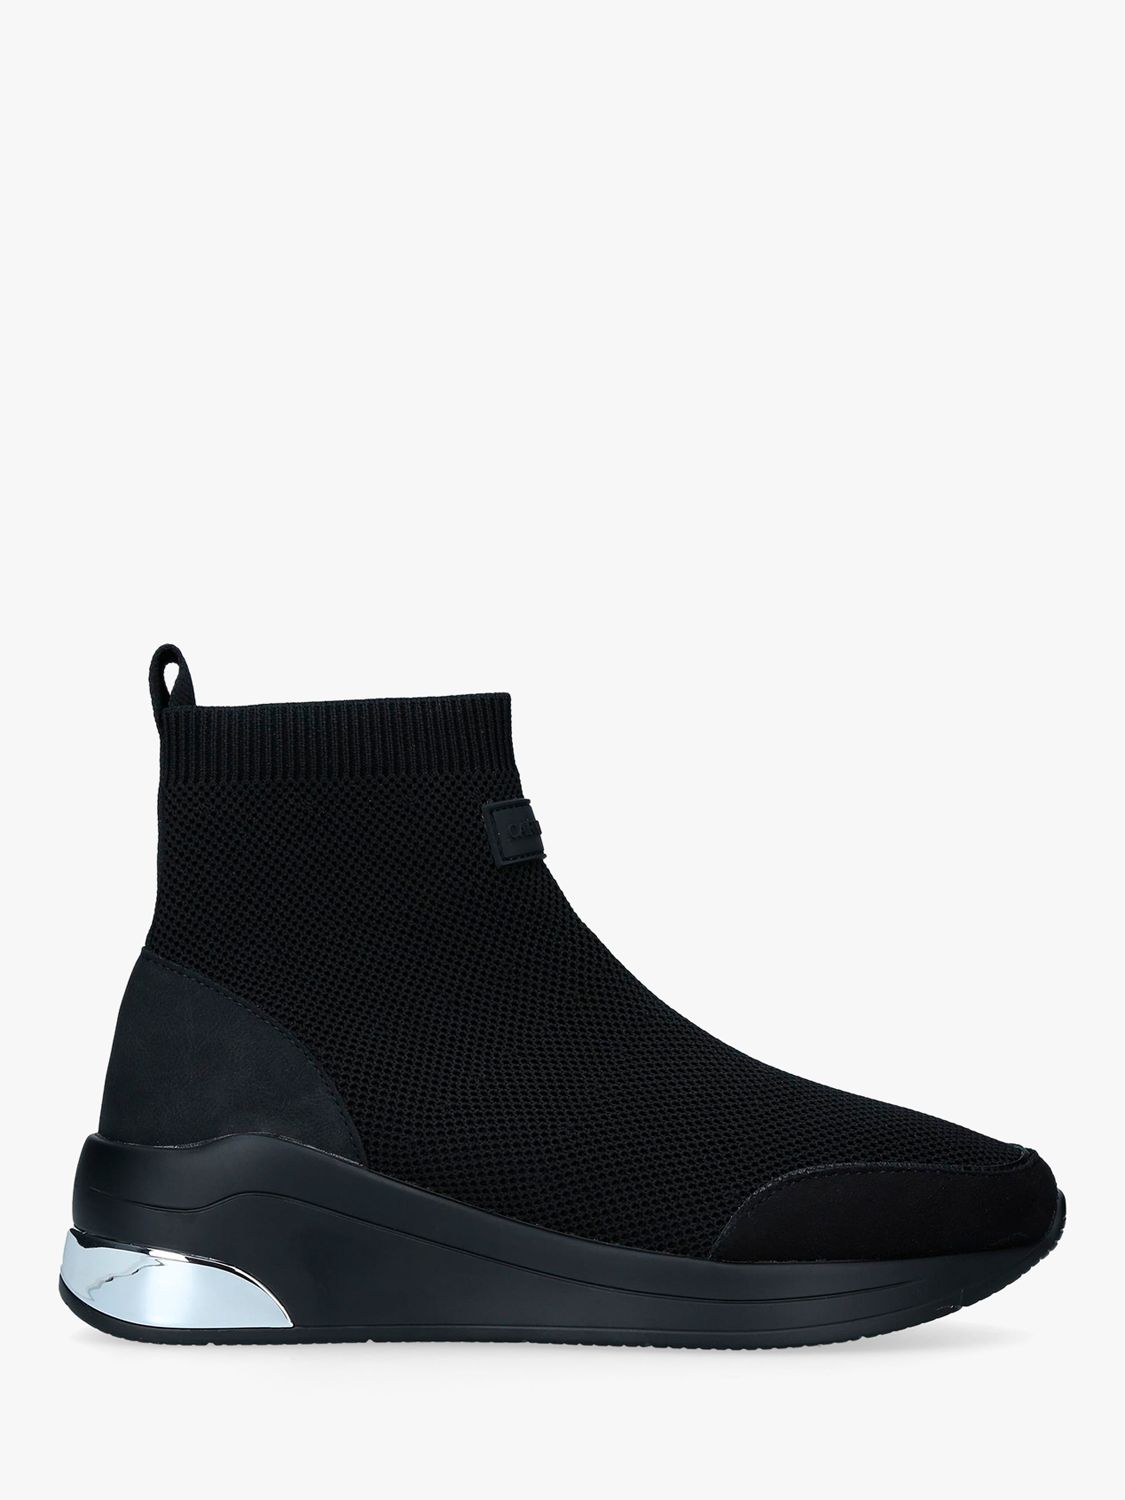 Carvela Jetson Knitted Sock Trainers, Black at John Lewis & Partners